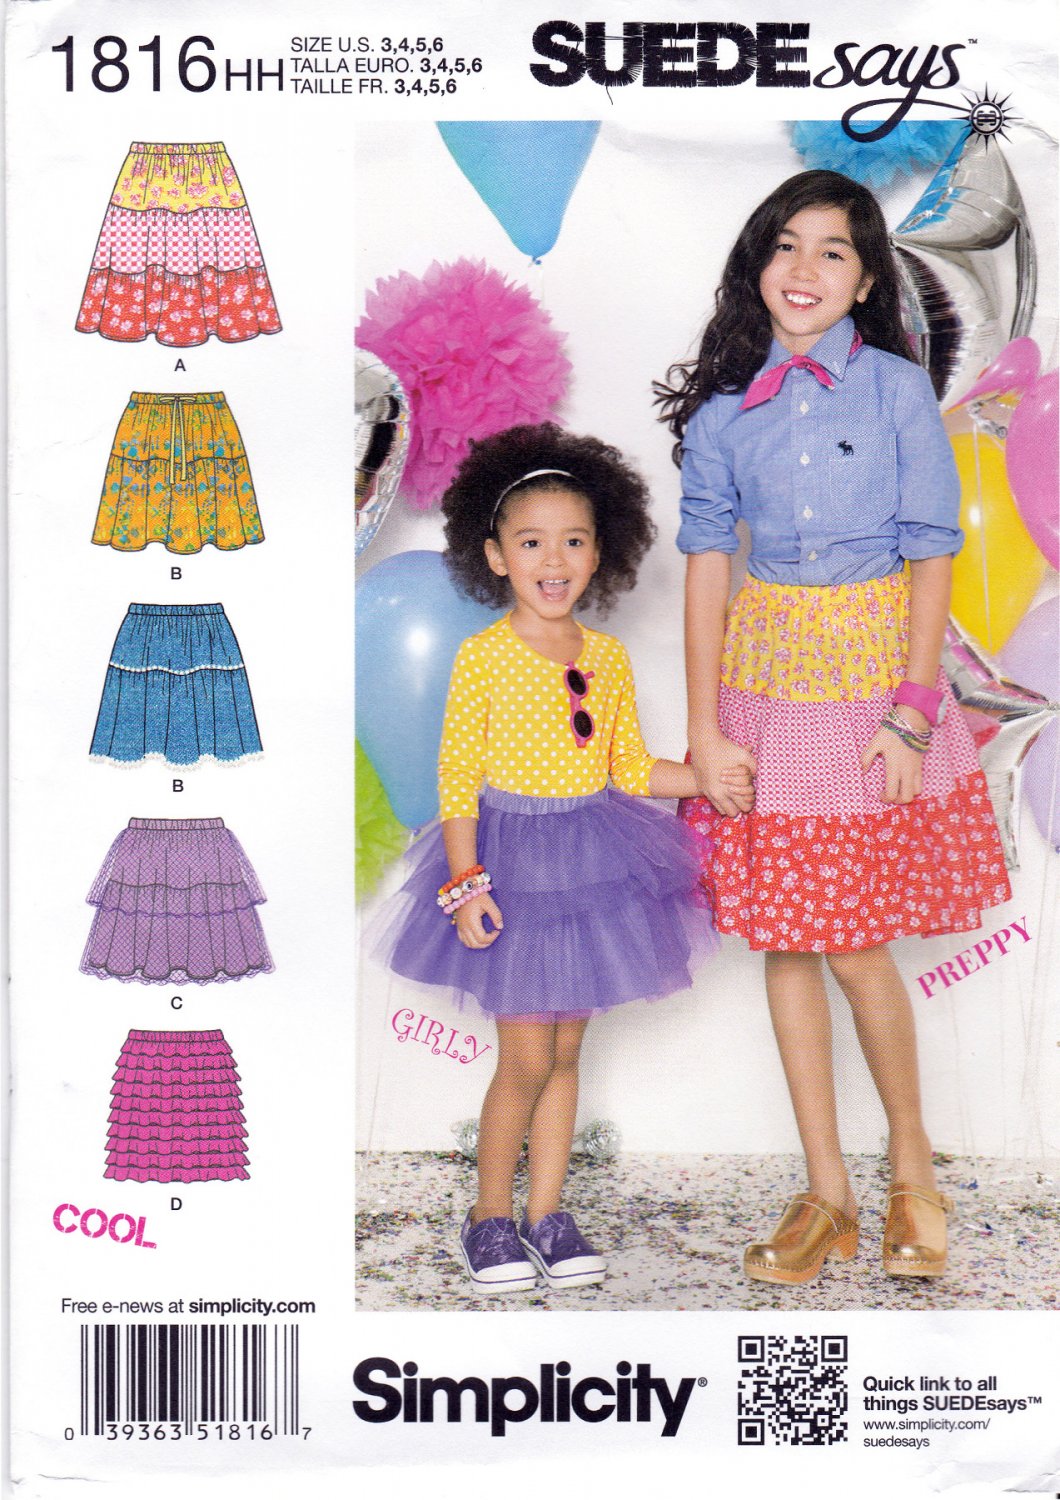 Simplicity 1816 Girls Pull On Skirts Sewing Pattern Various Styles Childrens Kids Sizes 3-4-5-6